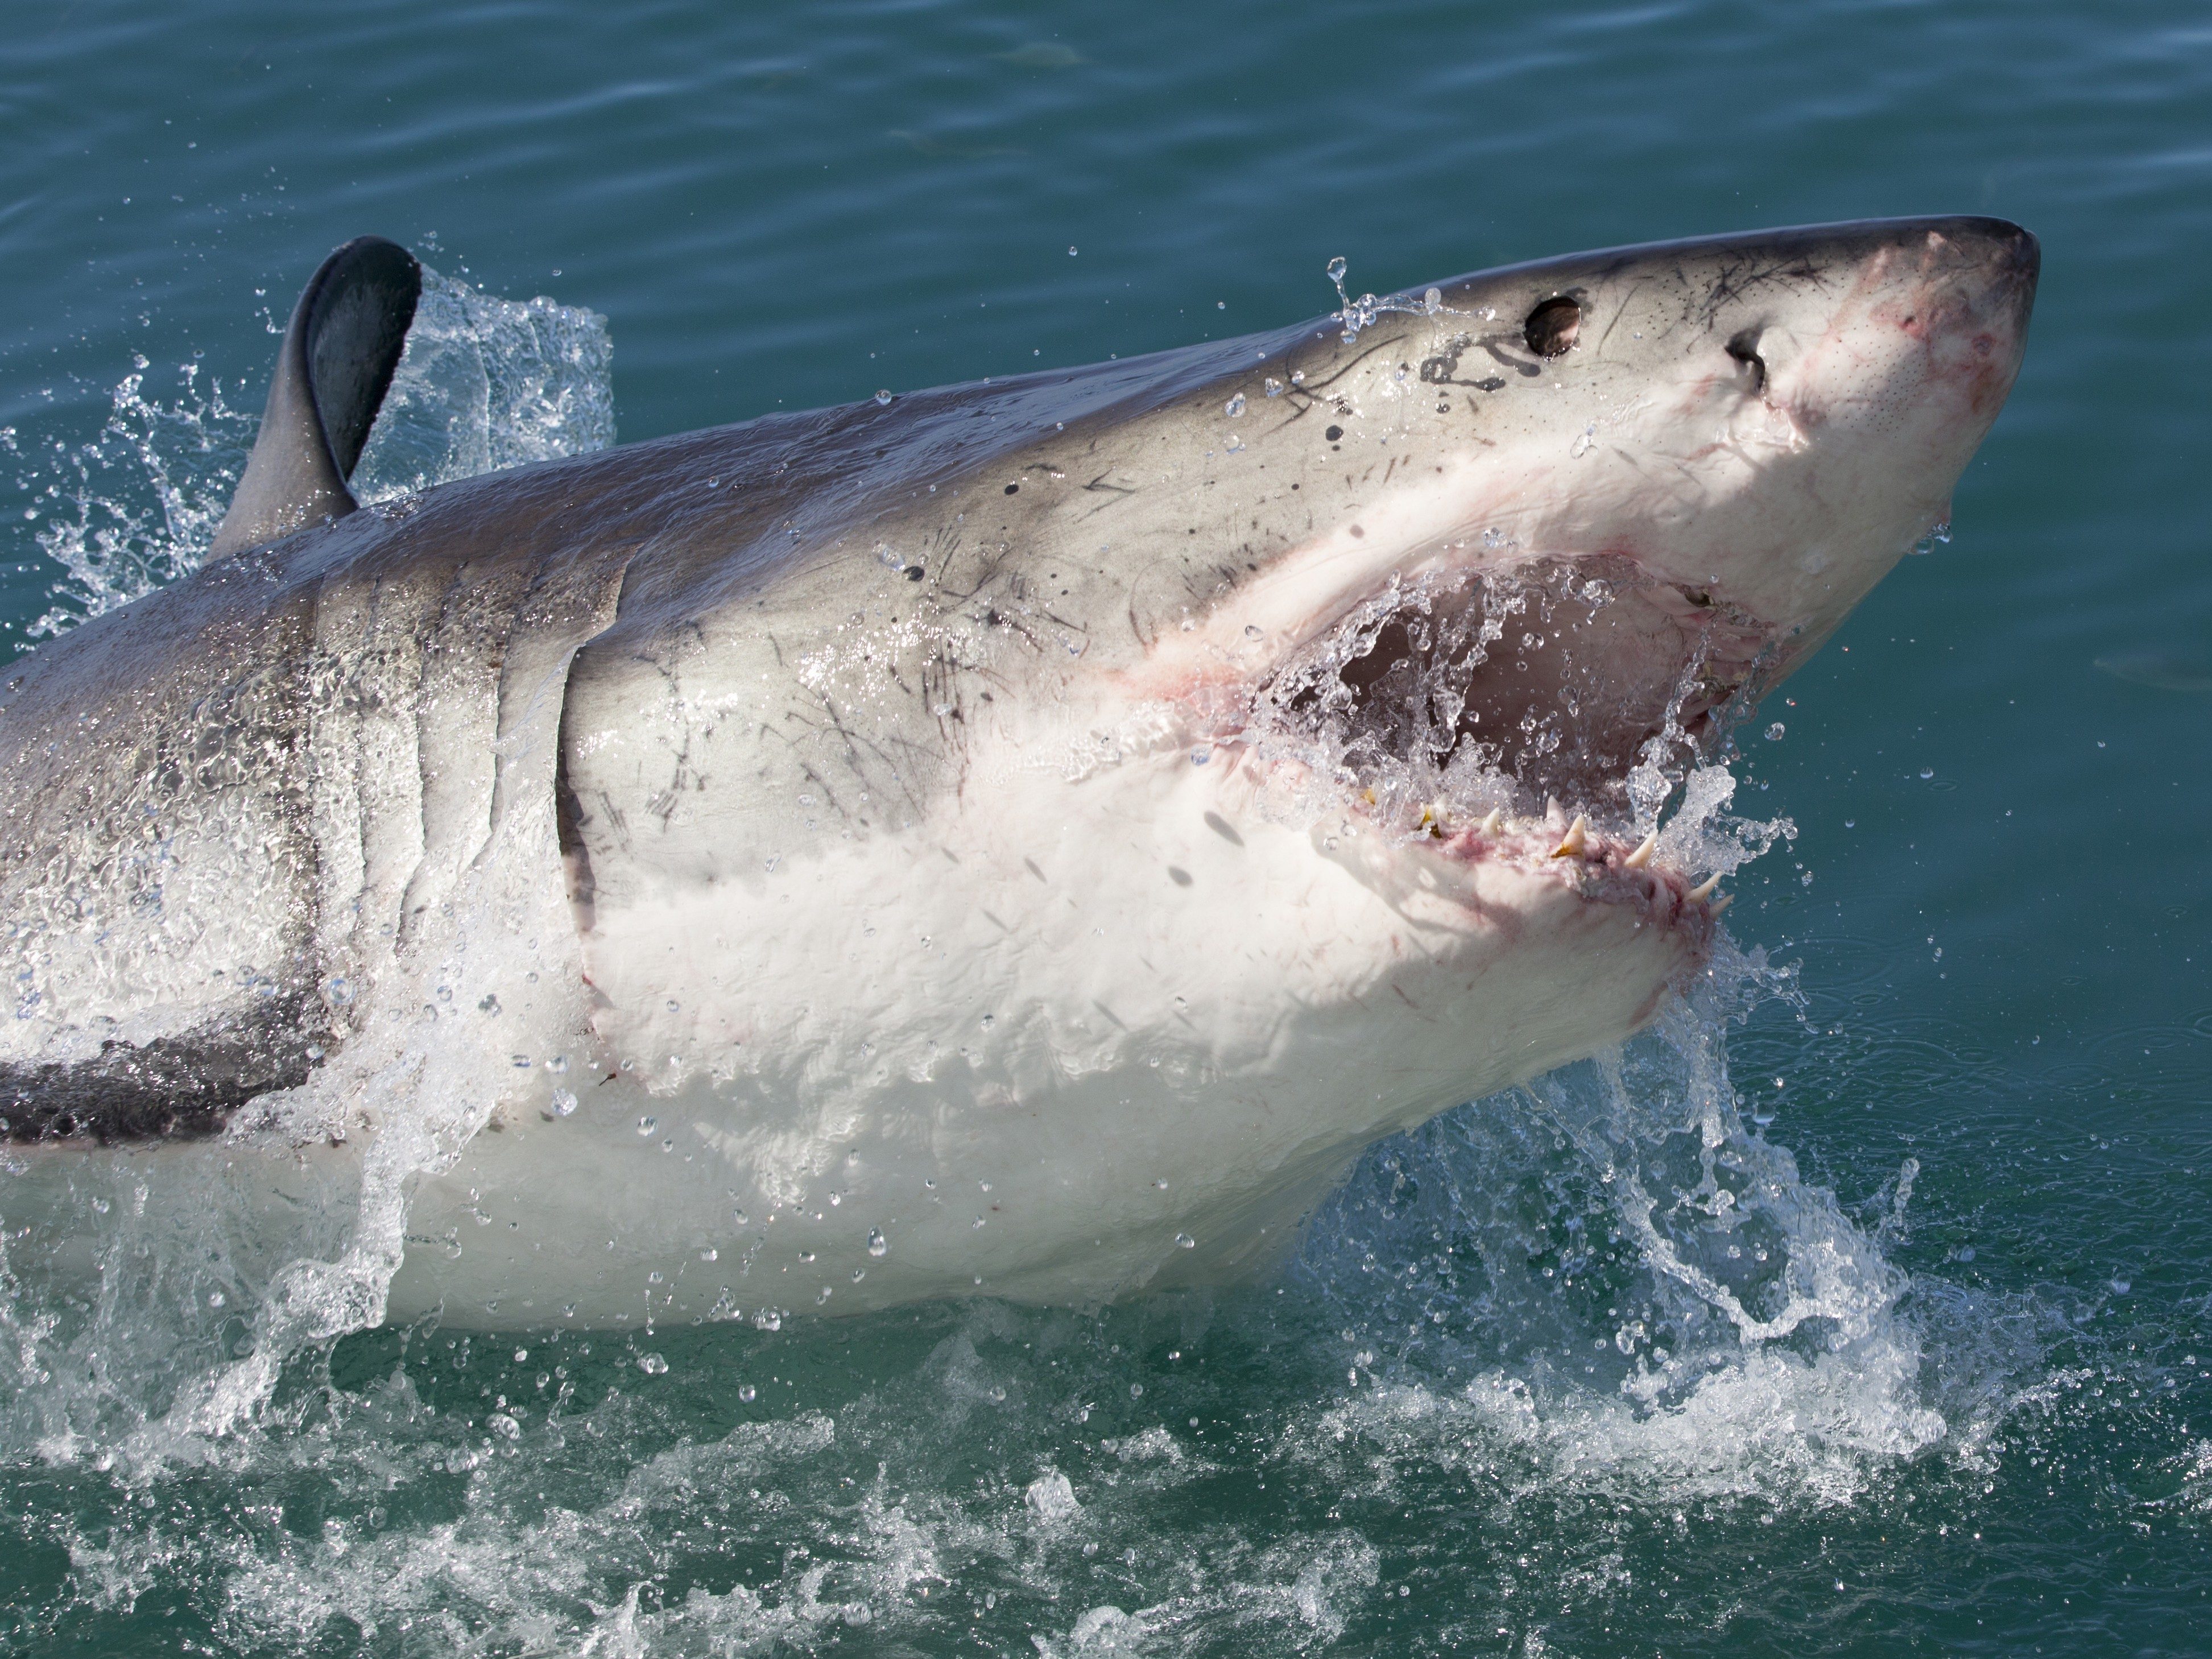 WHAT TO DO WHEN A SHARK ATTACKS